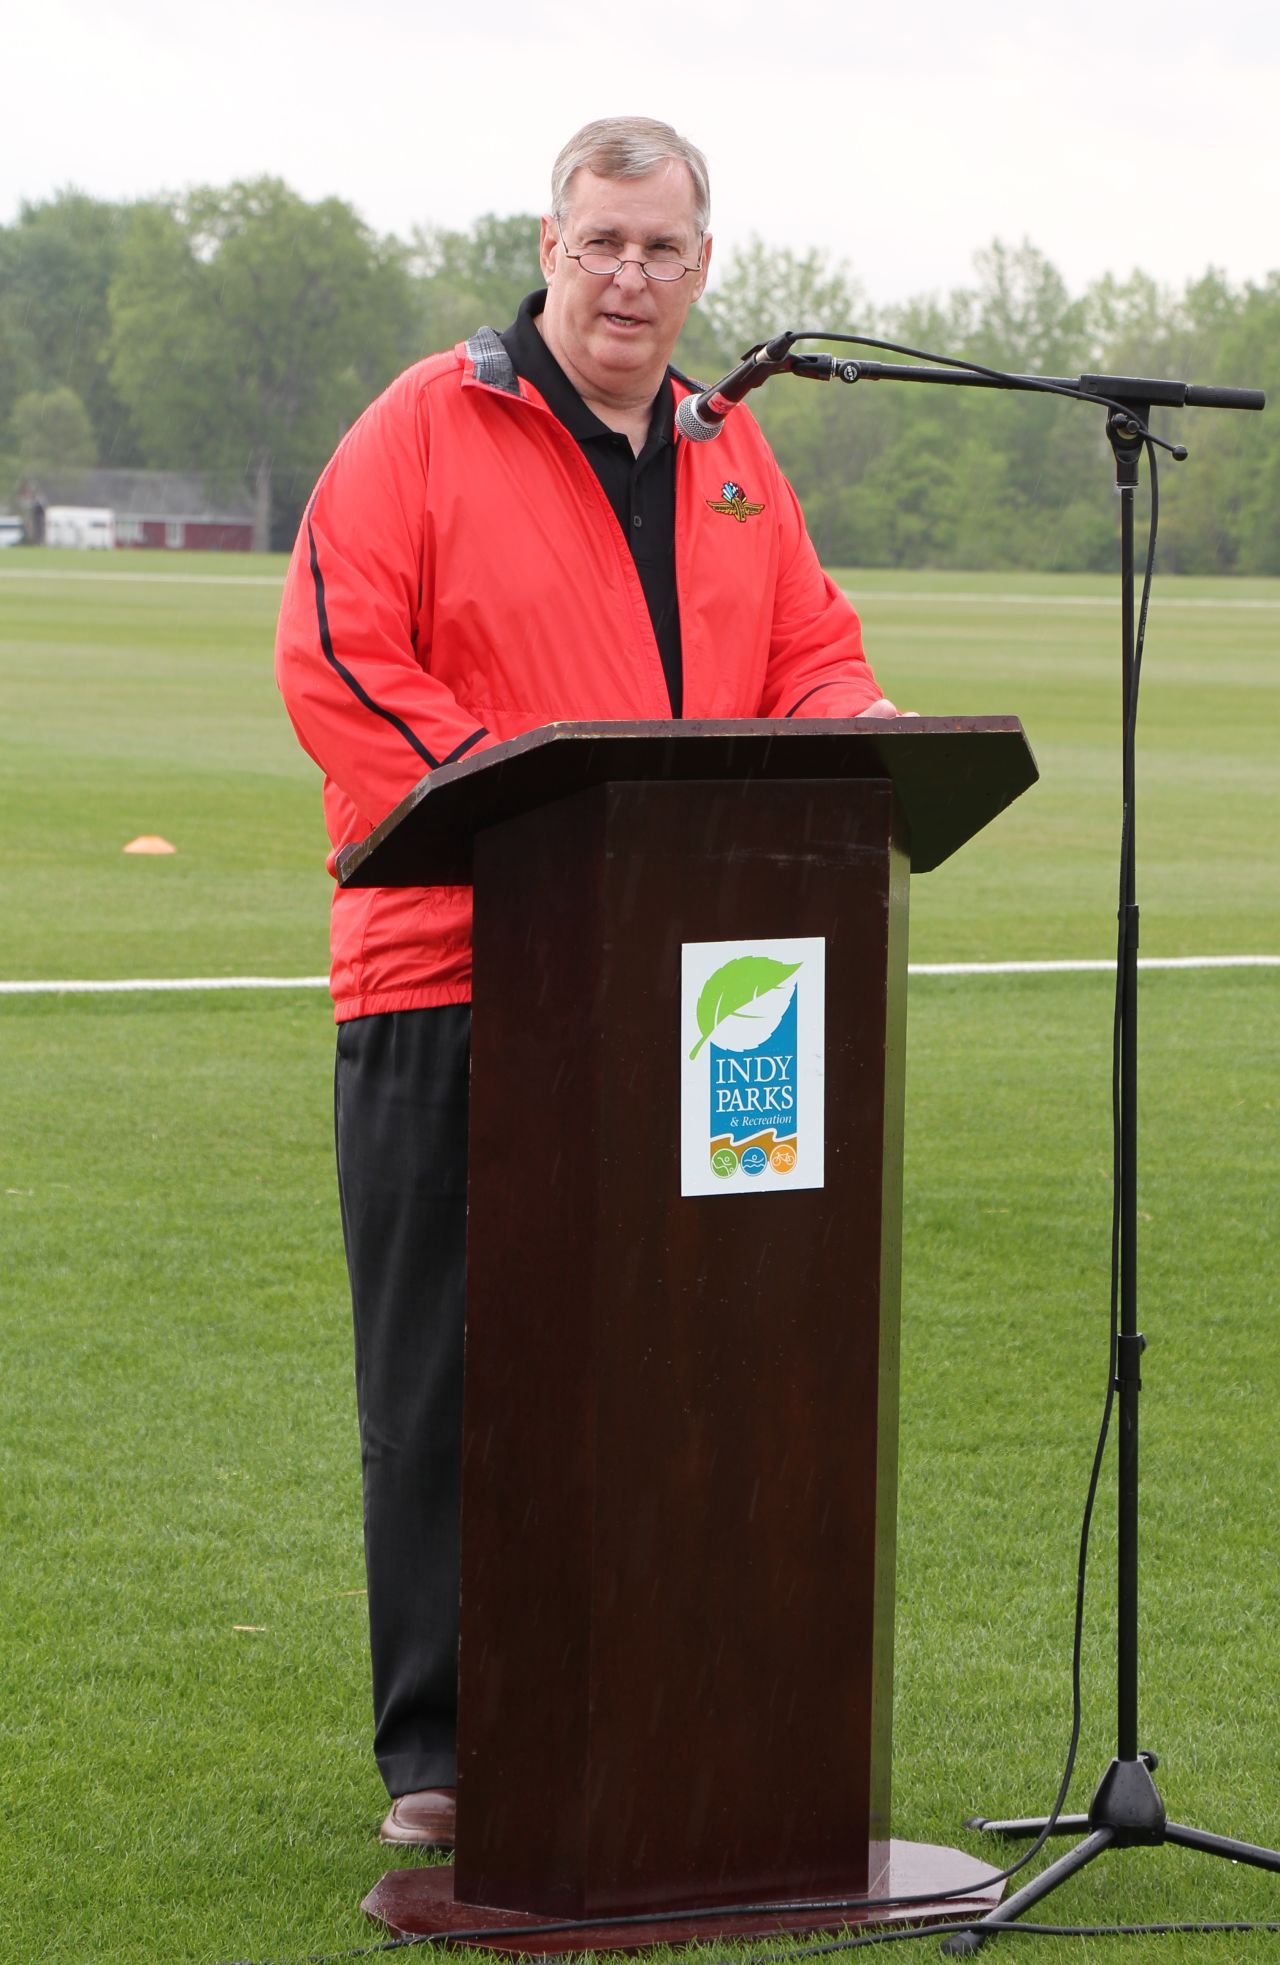 Indianapolis Mayor Greg Ballard welcomes the teams to World Sports Park, Canada v United States of America, ICC Americas Regional T20, Indianapolis, May 9, 2015